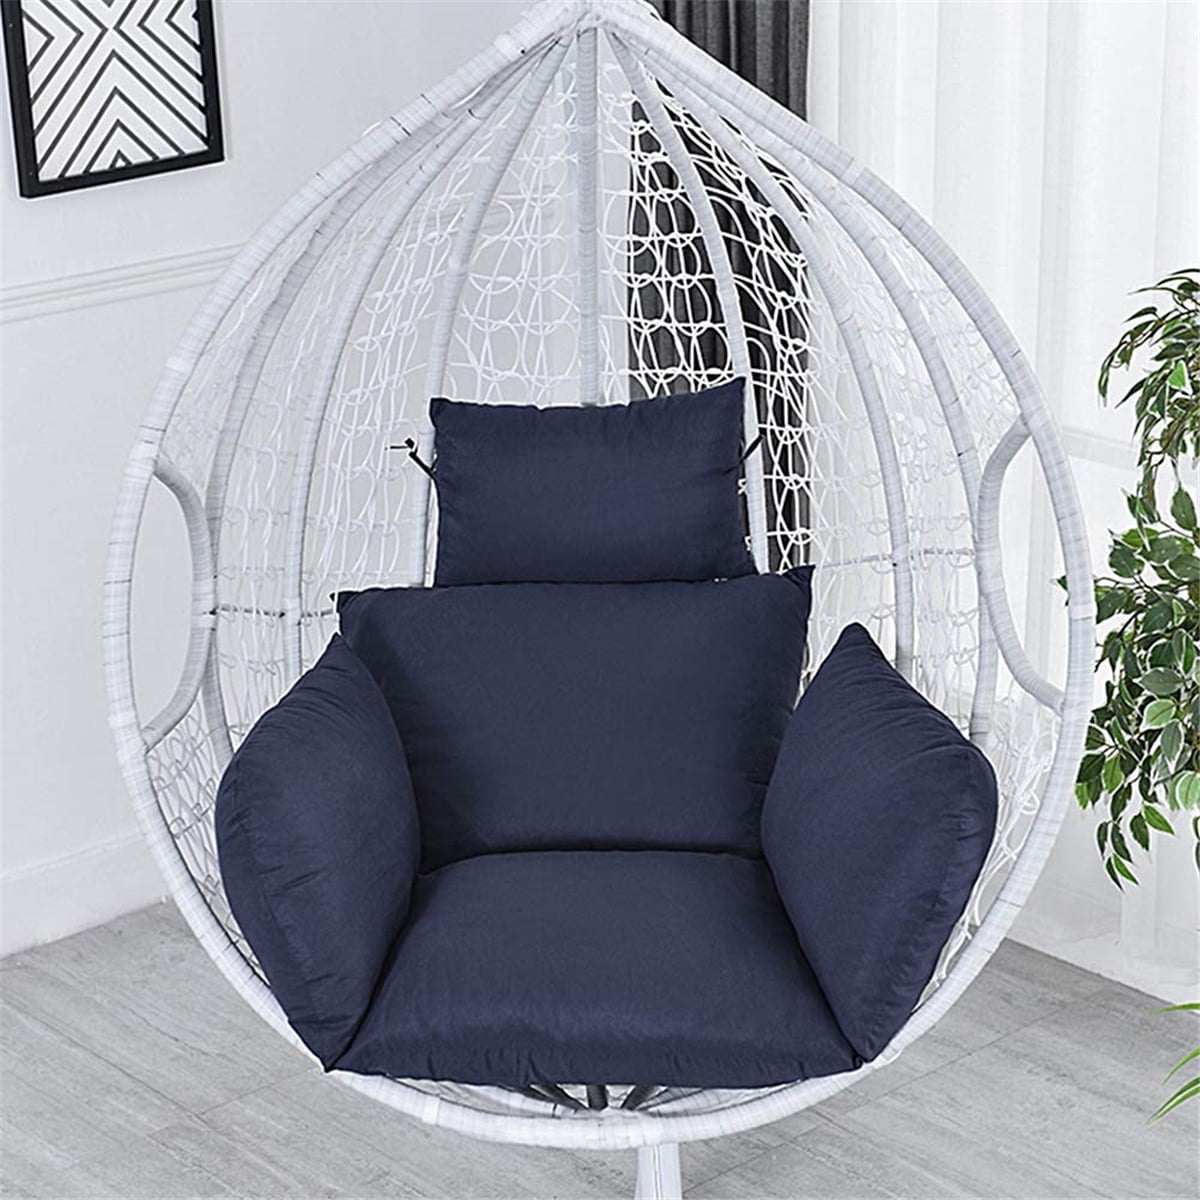 Cover Hanging Swing Egg Chair Garden Patio Chair Mats Outdoor/Indoor Cushion 